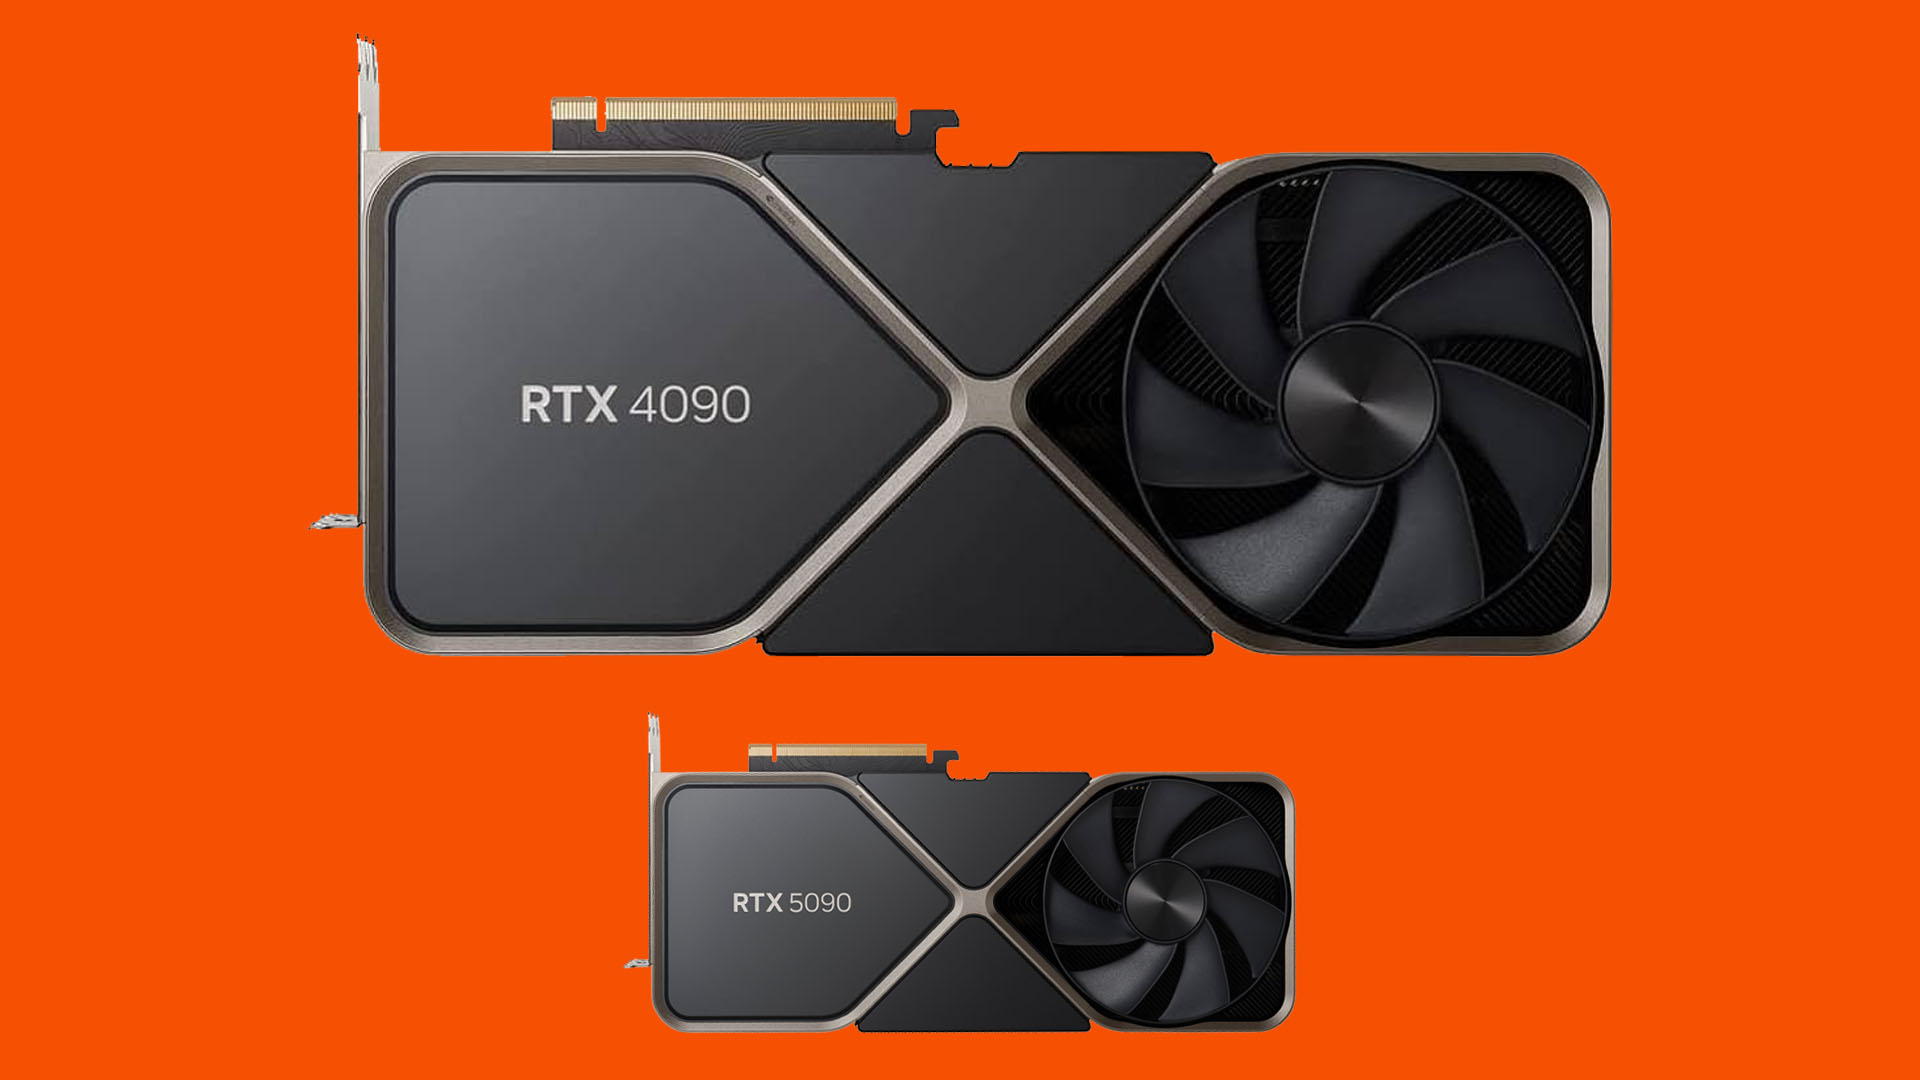 The Nvidia GeForce RTX 5090 FE could be far smaller than the 4090